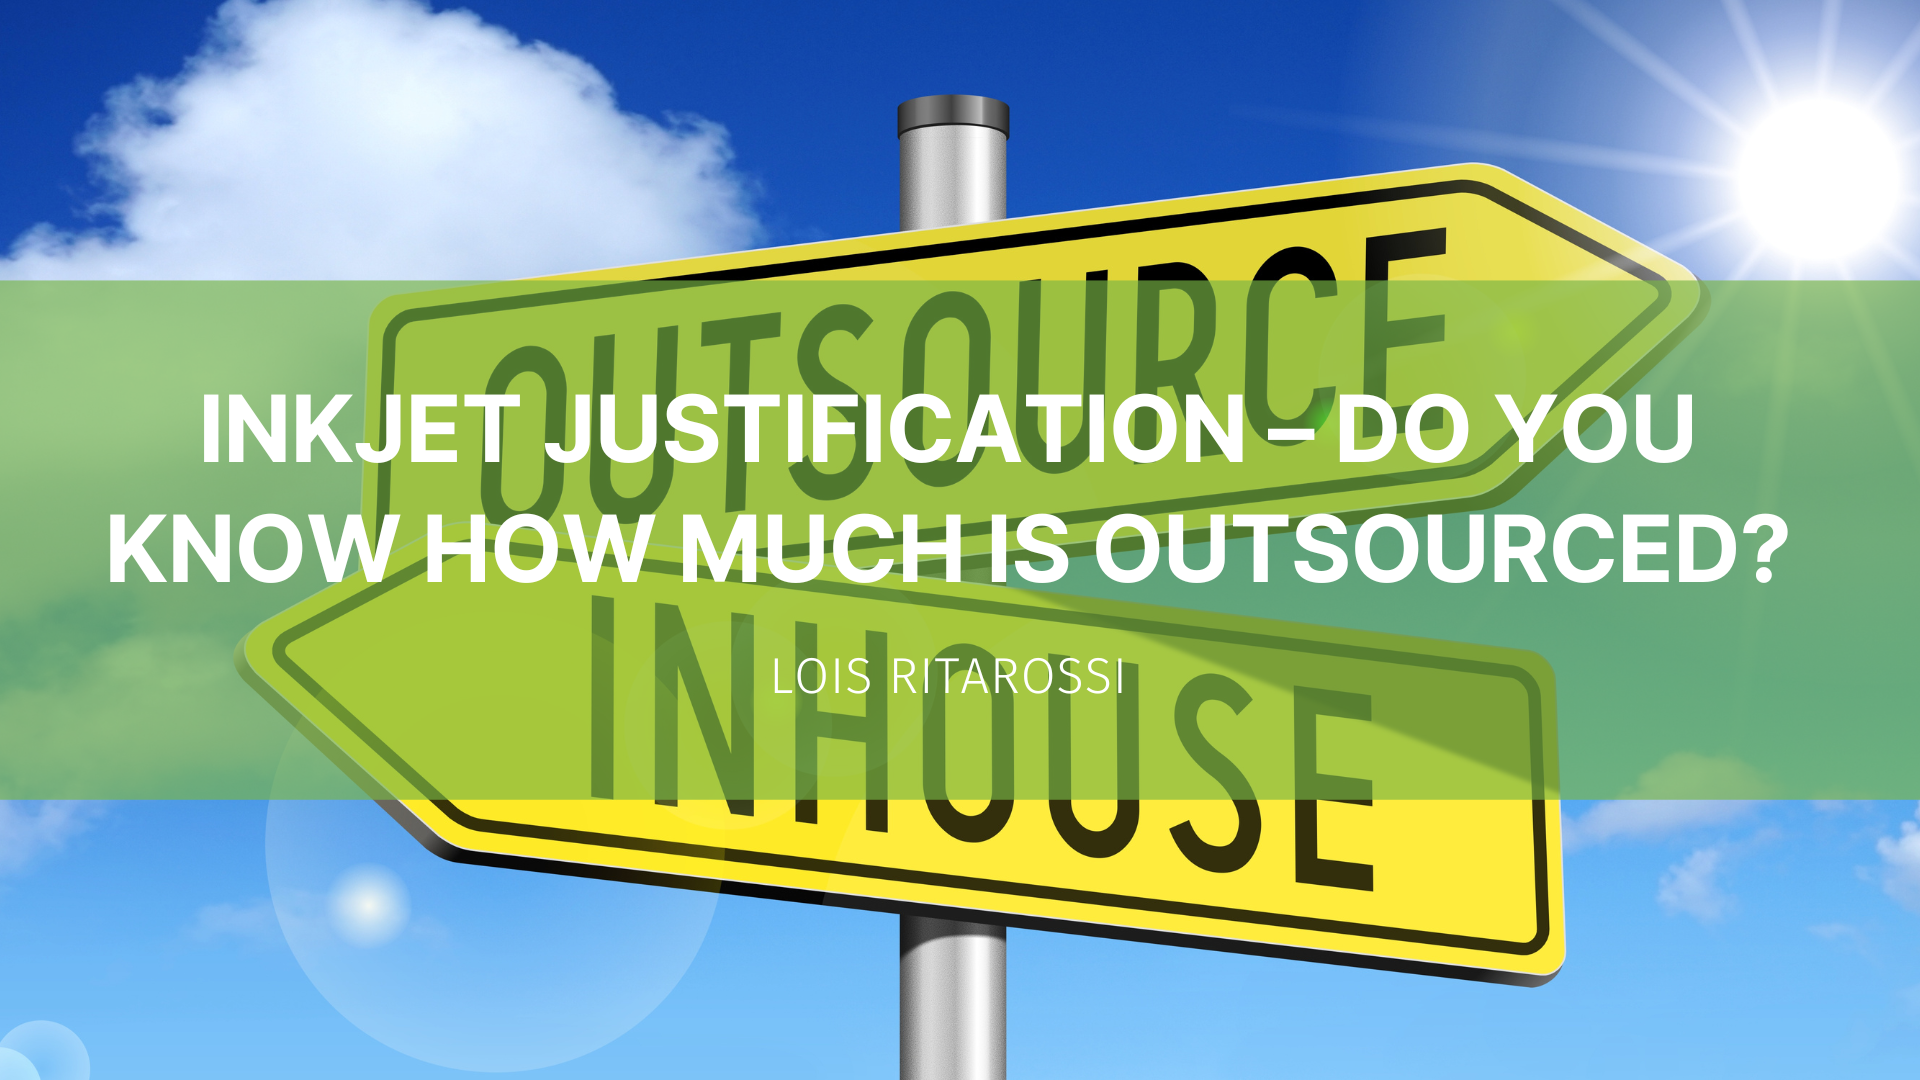 Featured image for “Inkjet justification – do you know how much is outsourced?”